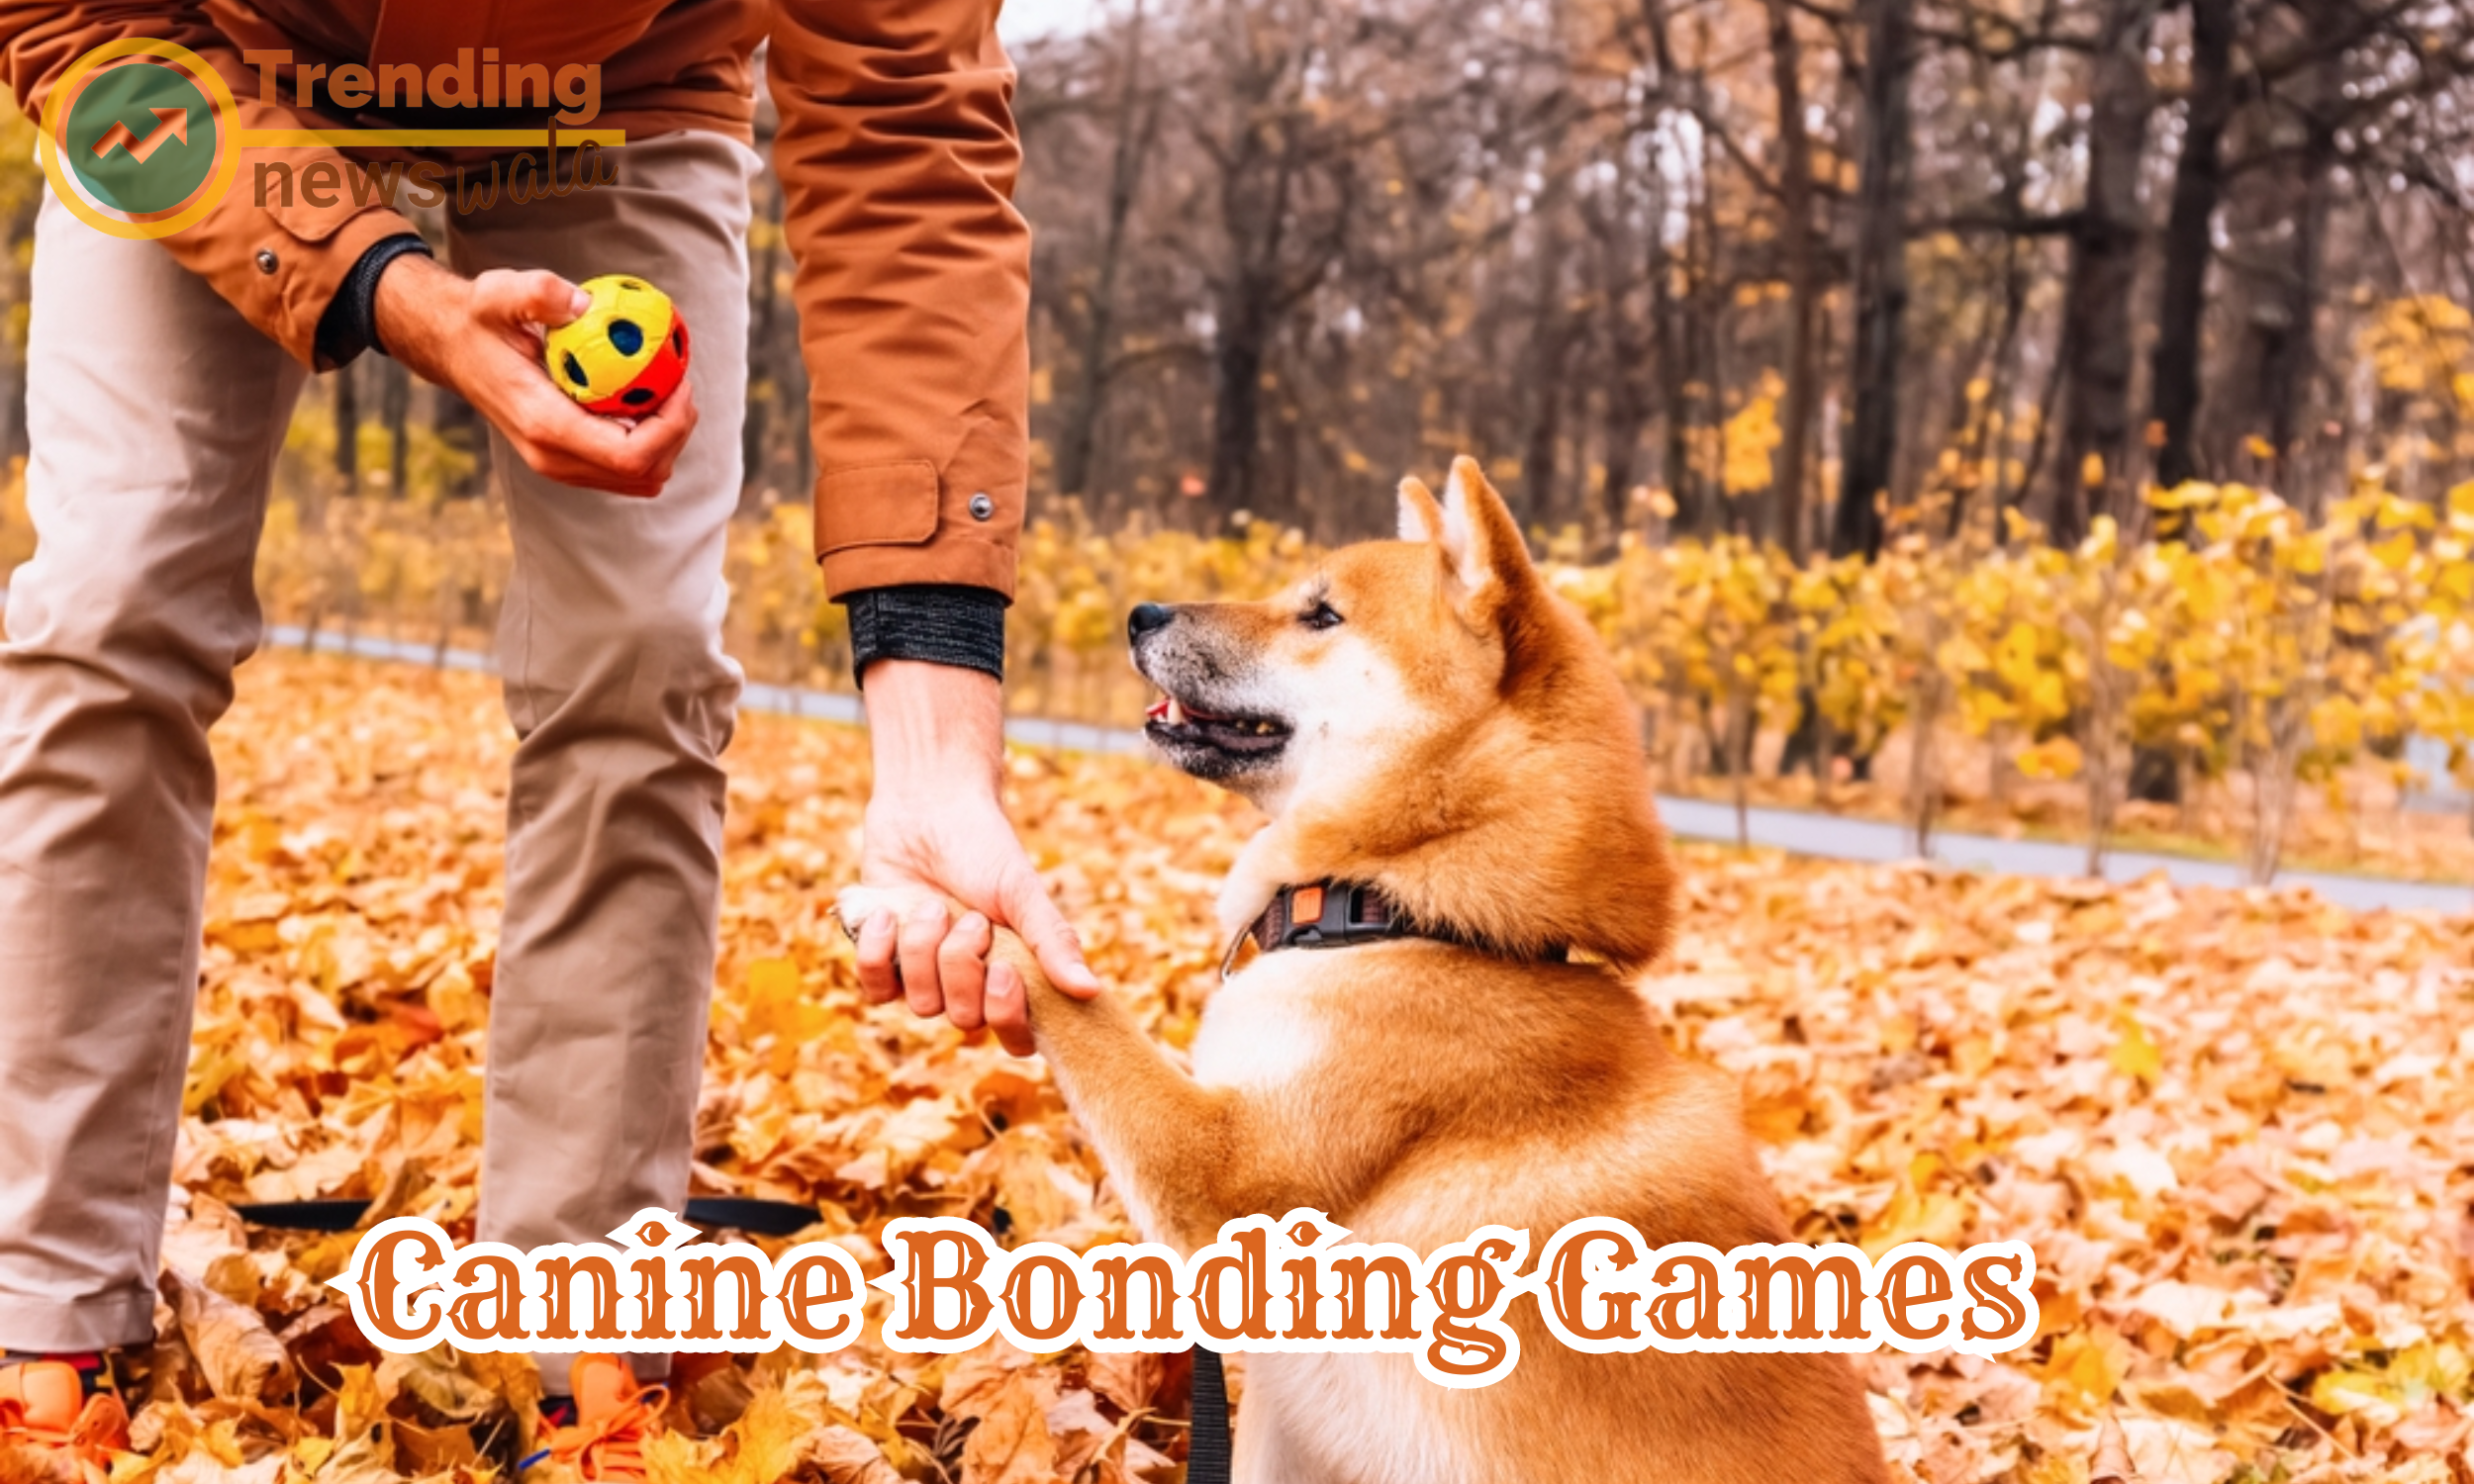 Canine bonding games are activities designed to strengthen the bond between dogs and their owners